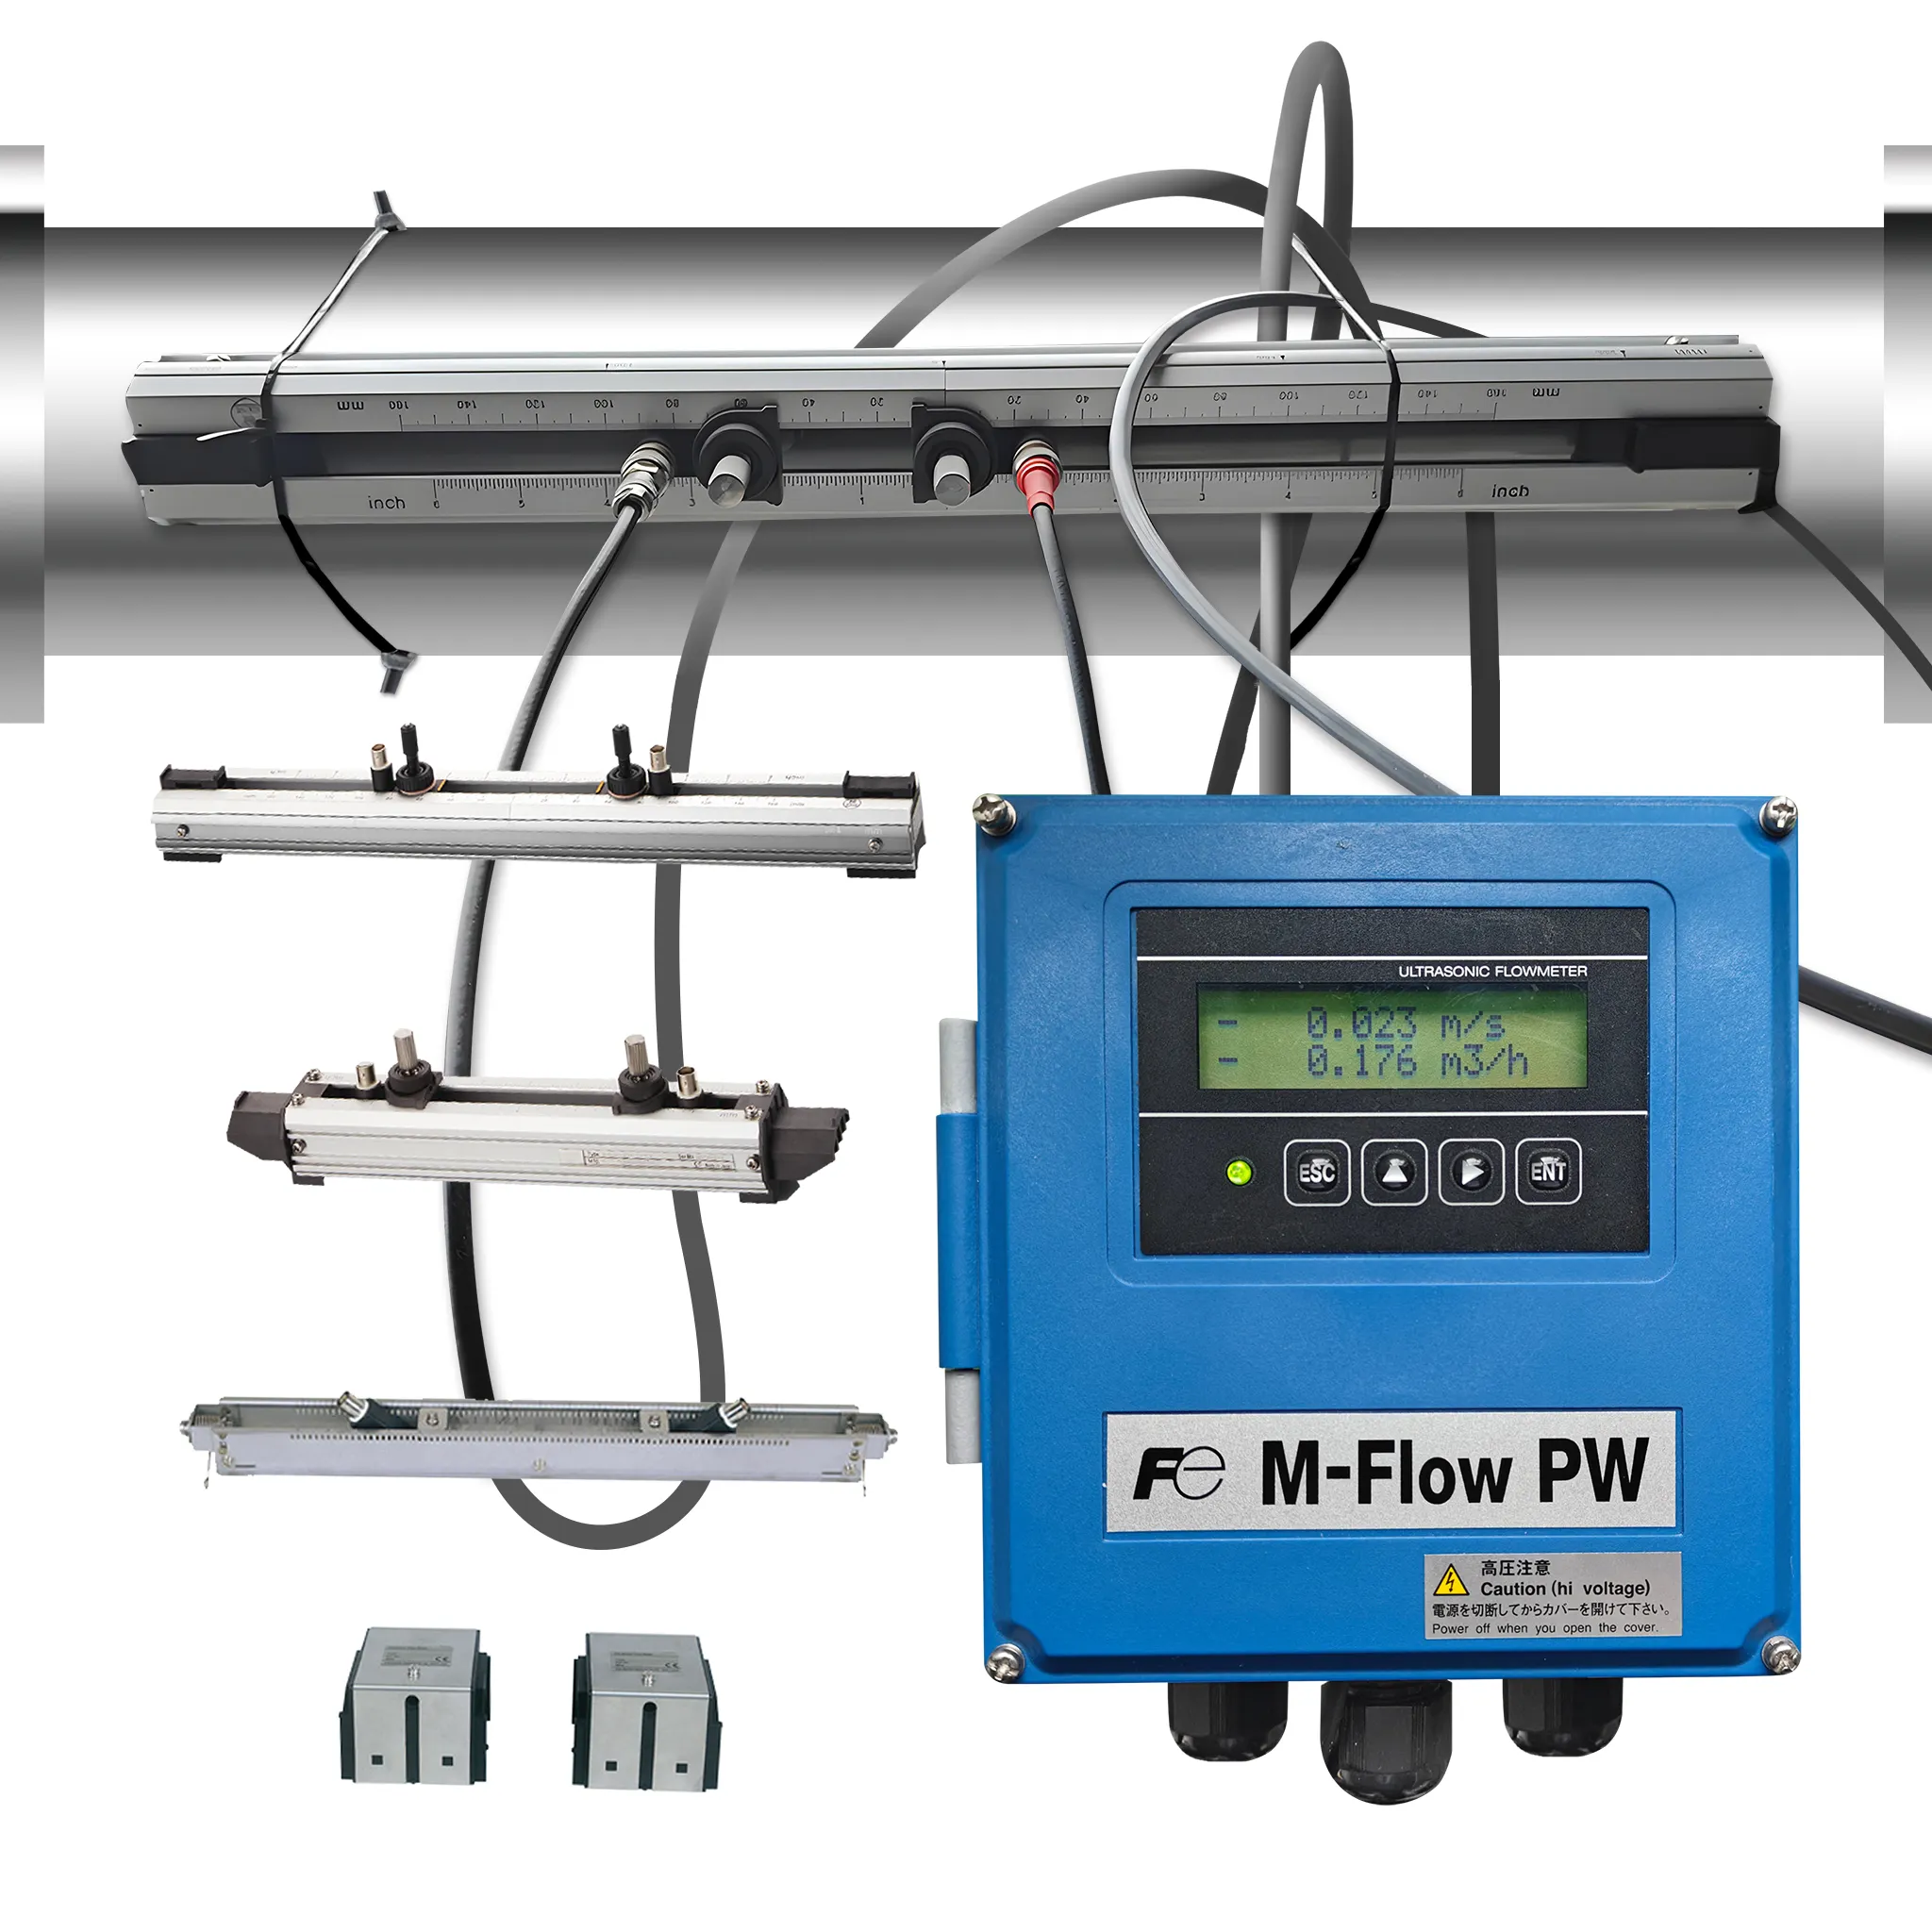 fuji Fixed Converter Liquid measurement Ultrasonic Flowmeter clamp on ultrasonic flow meter with Transducer for water